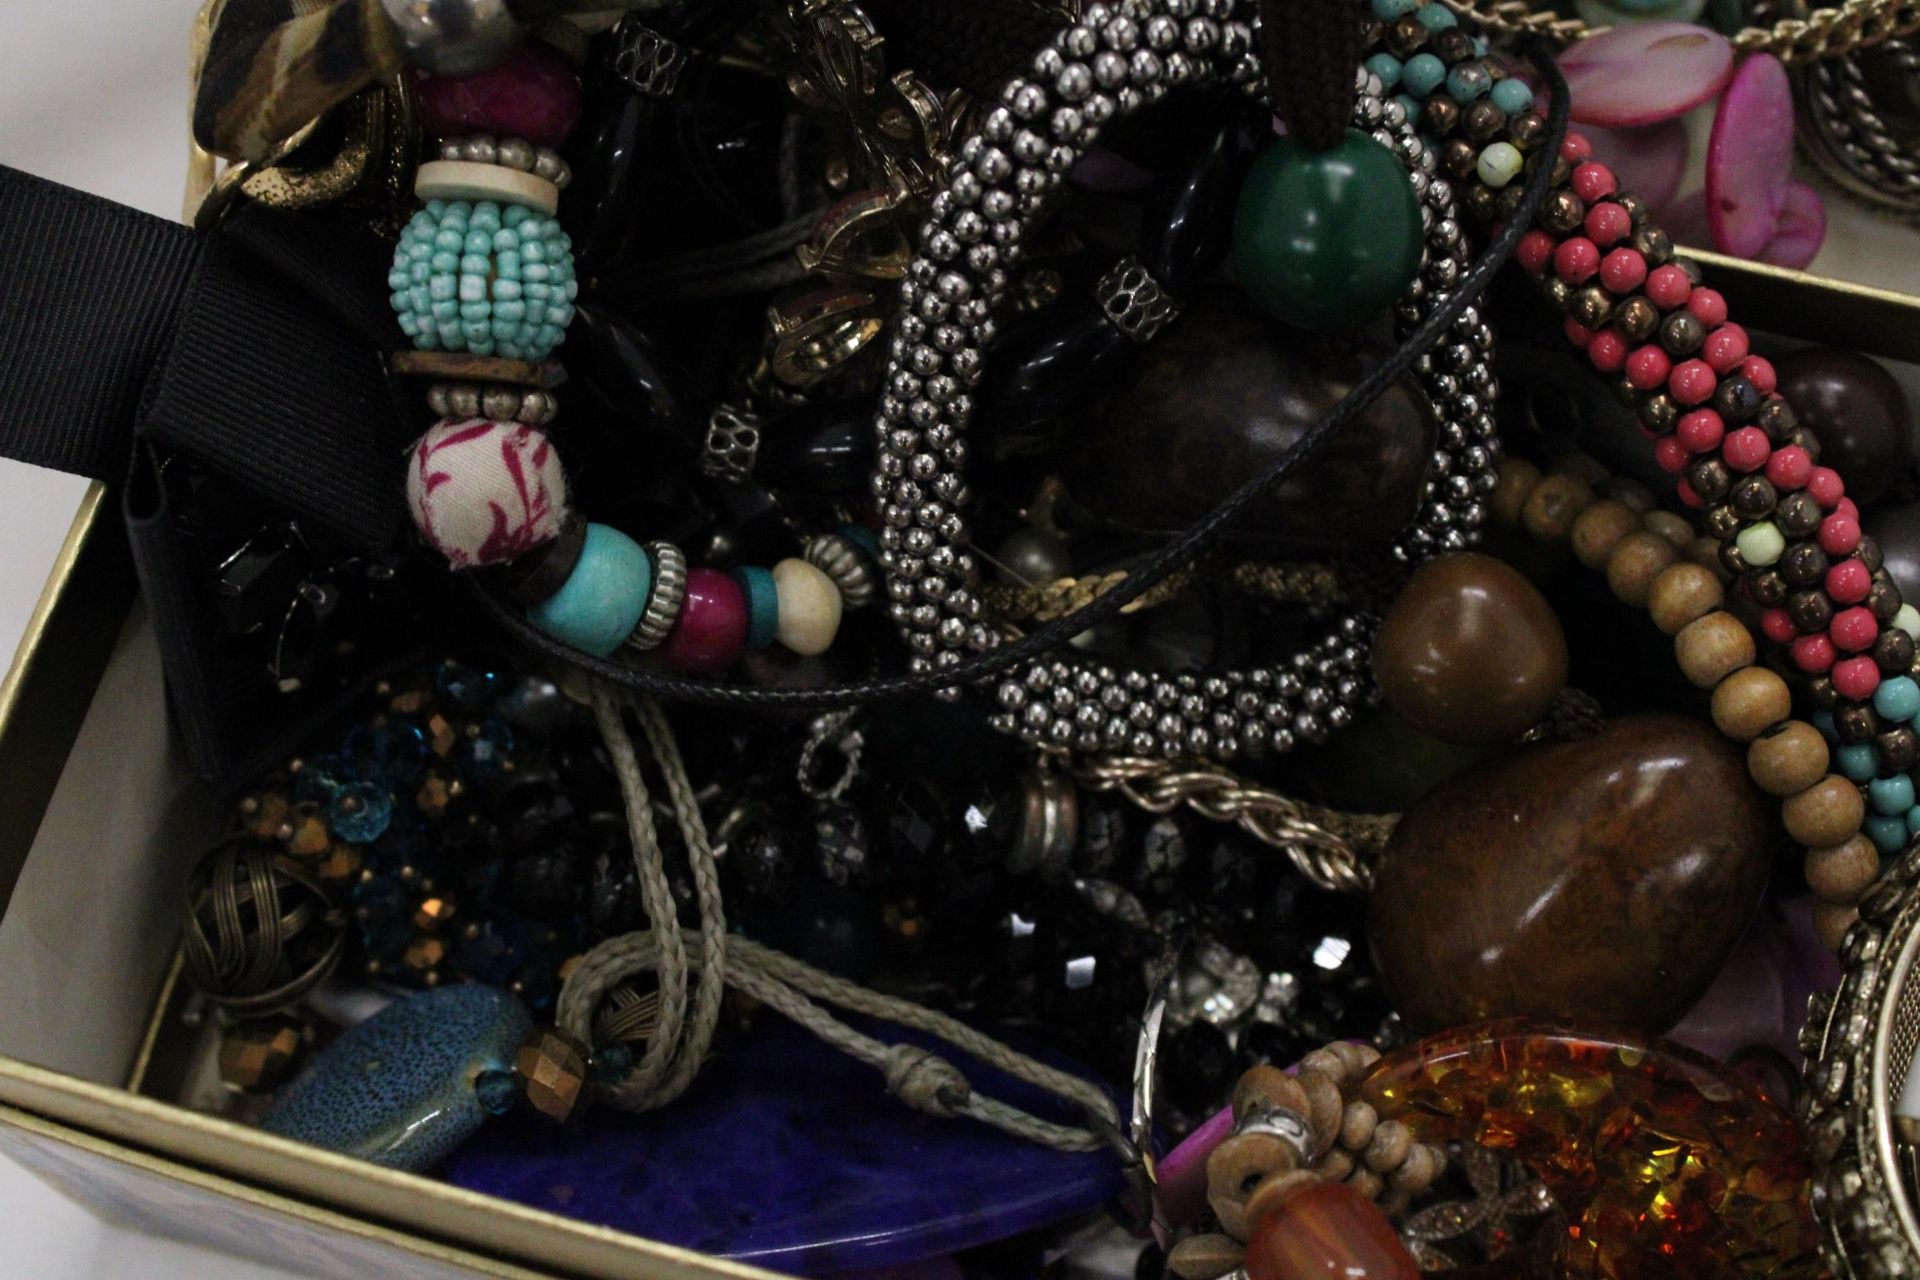 A QUANTITY OF COSTUME JEWELLERY TO INCLUDE NECKLACES, EARRINGS, BANGLES, ETC, IN A DOMED BOX - Image 5 of 5